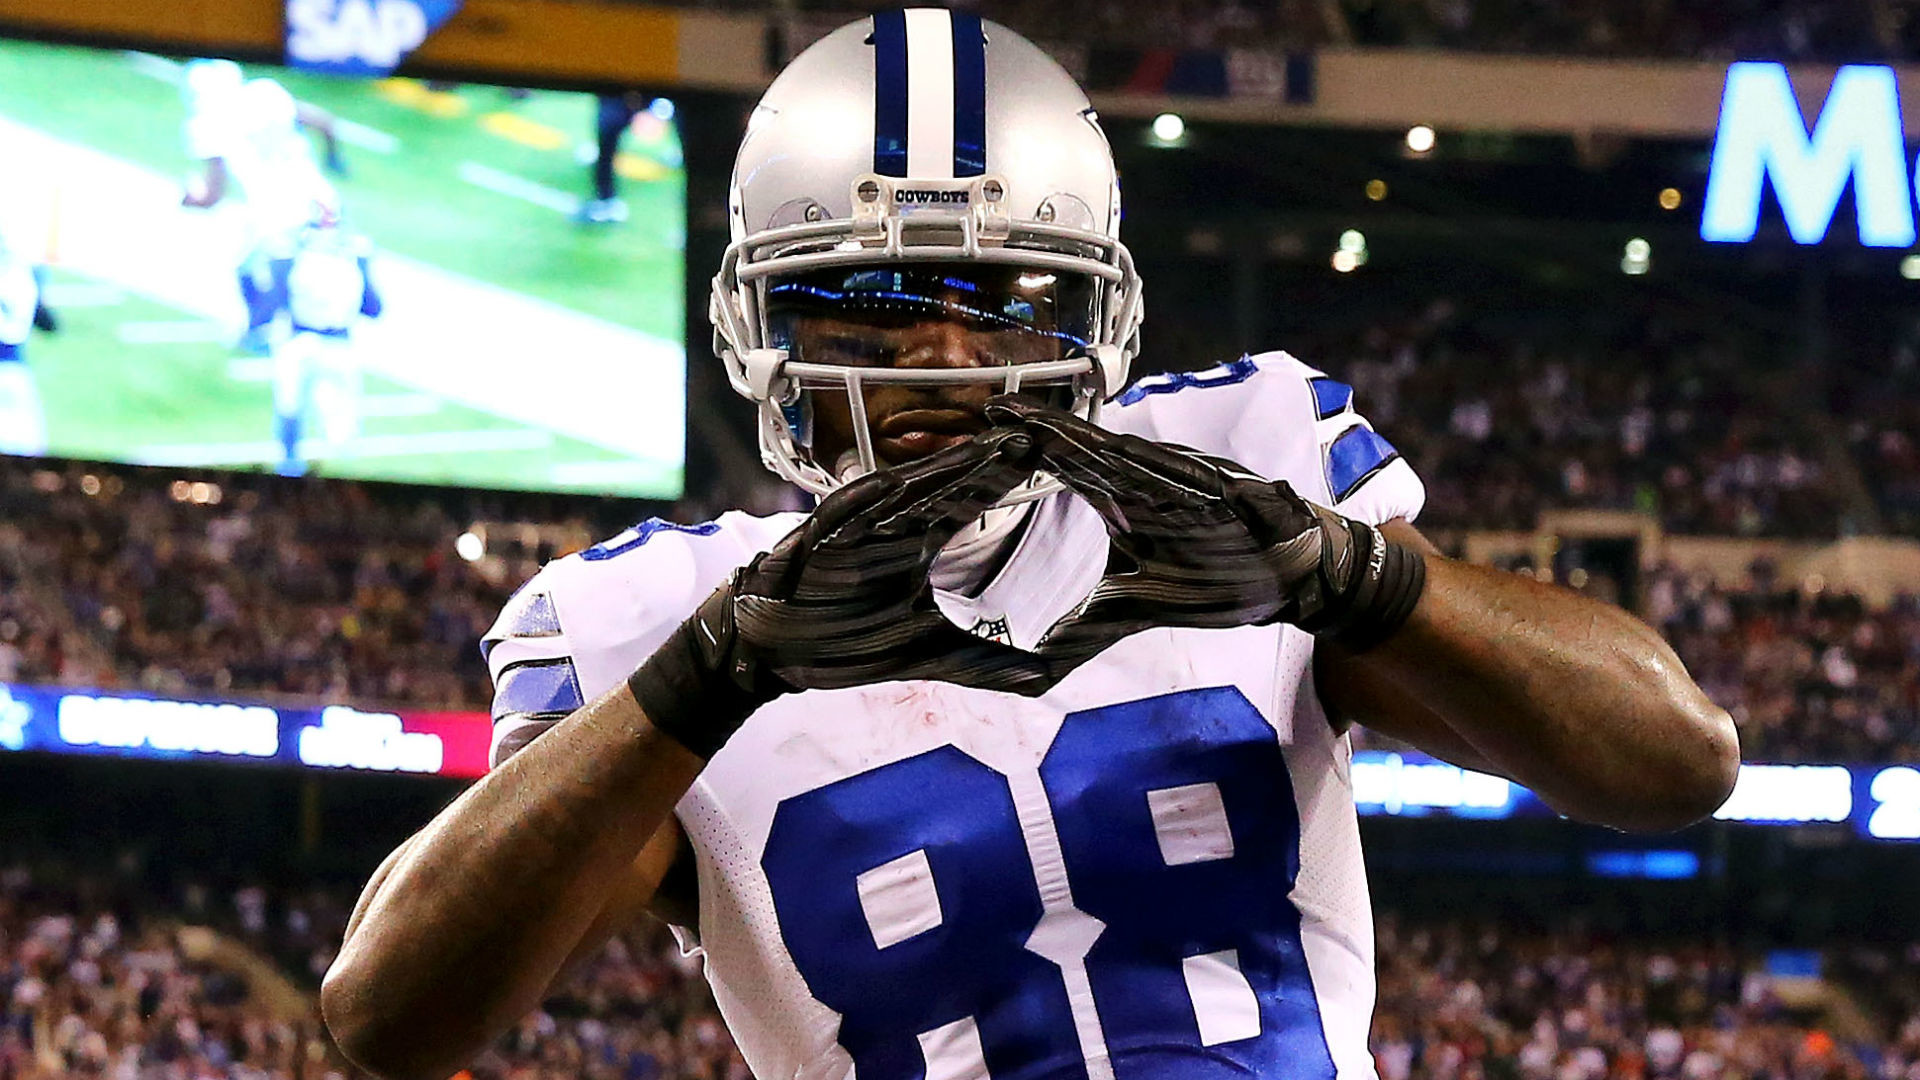 1920x1080 Cowboys leaning toward giving Dez Bryant franchise tag